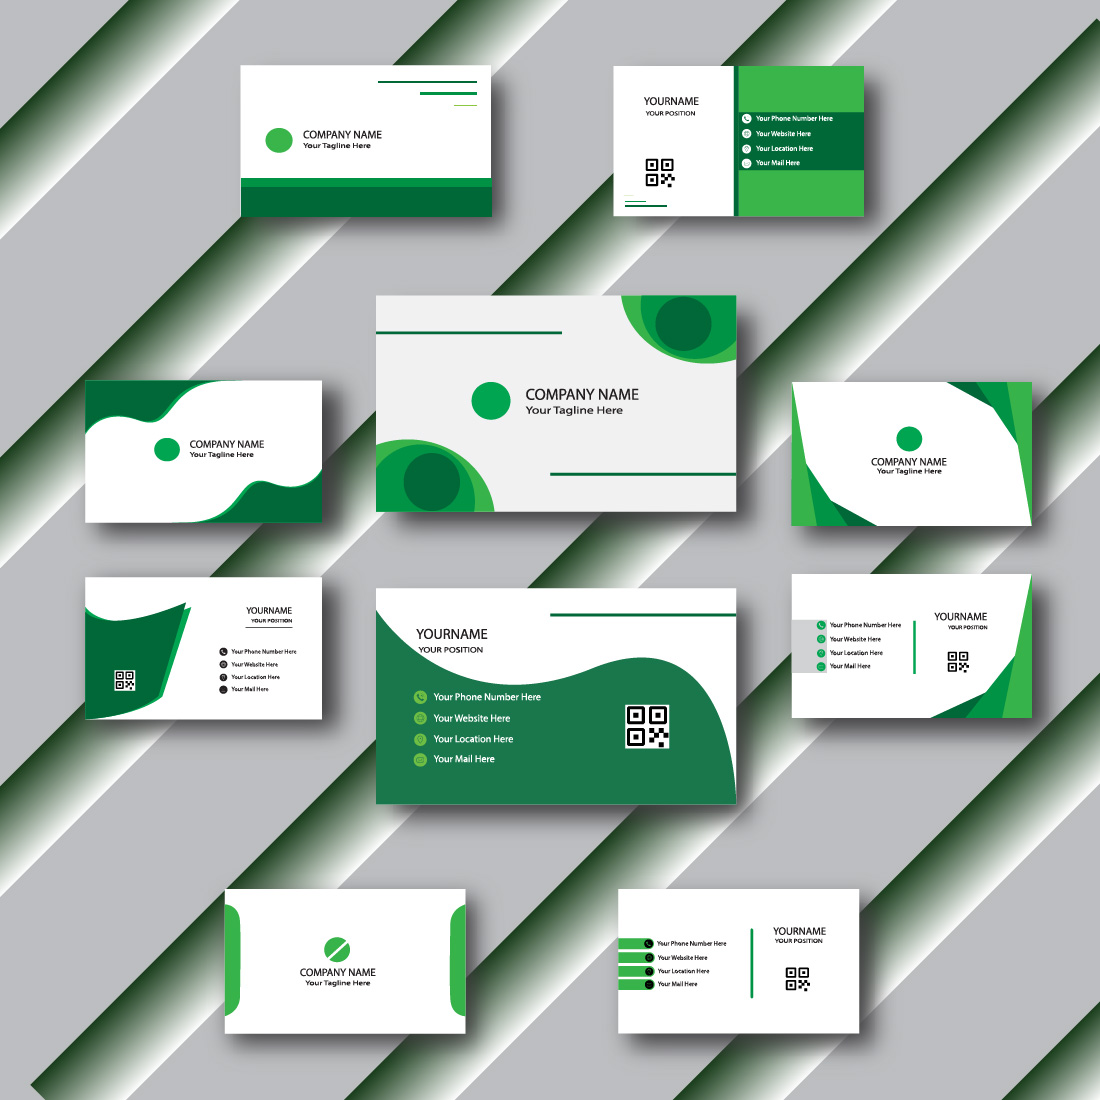 Creative Business Card Template Design cover image.